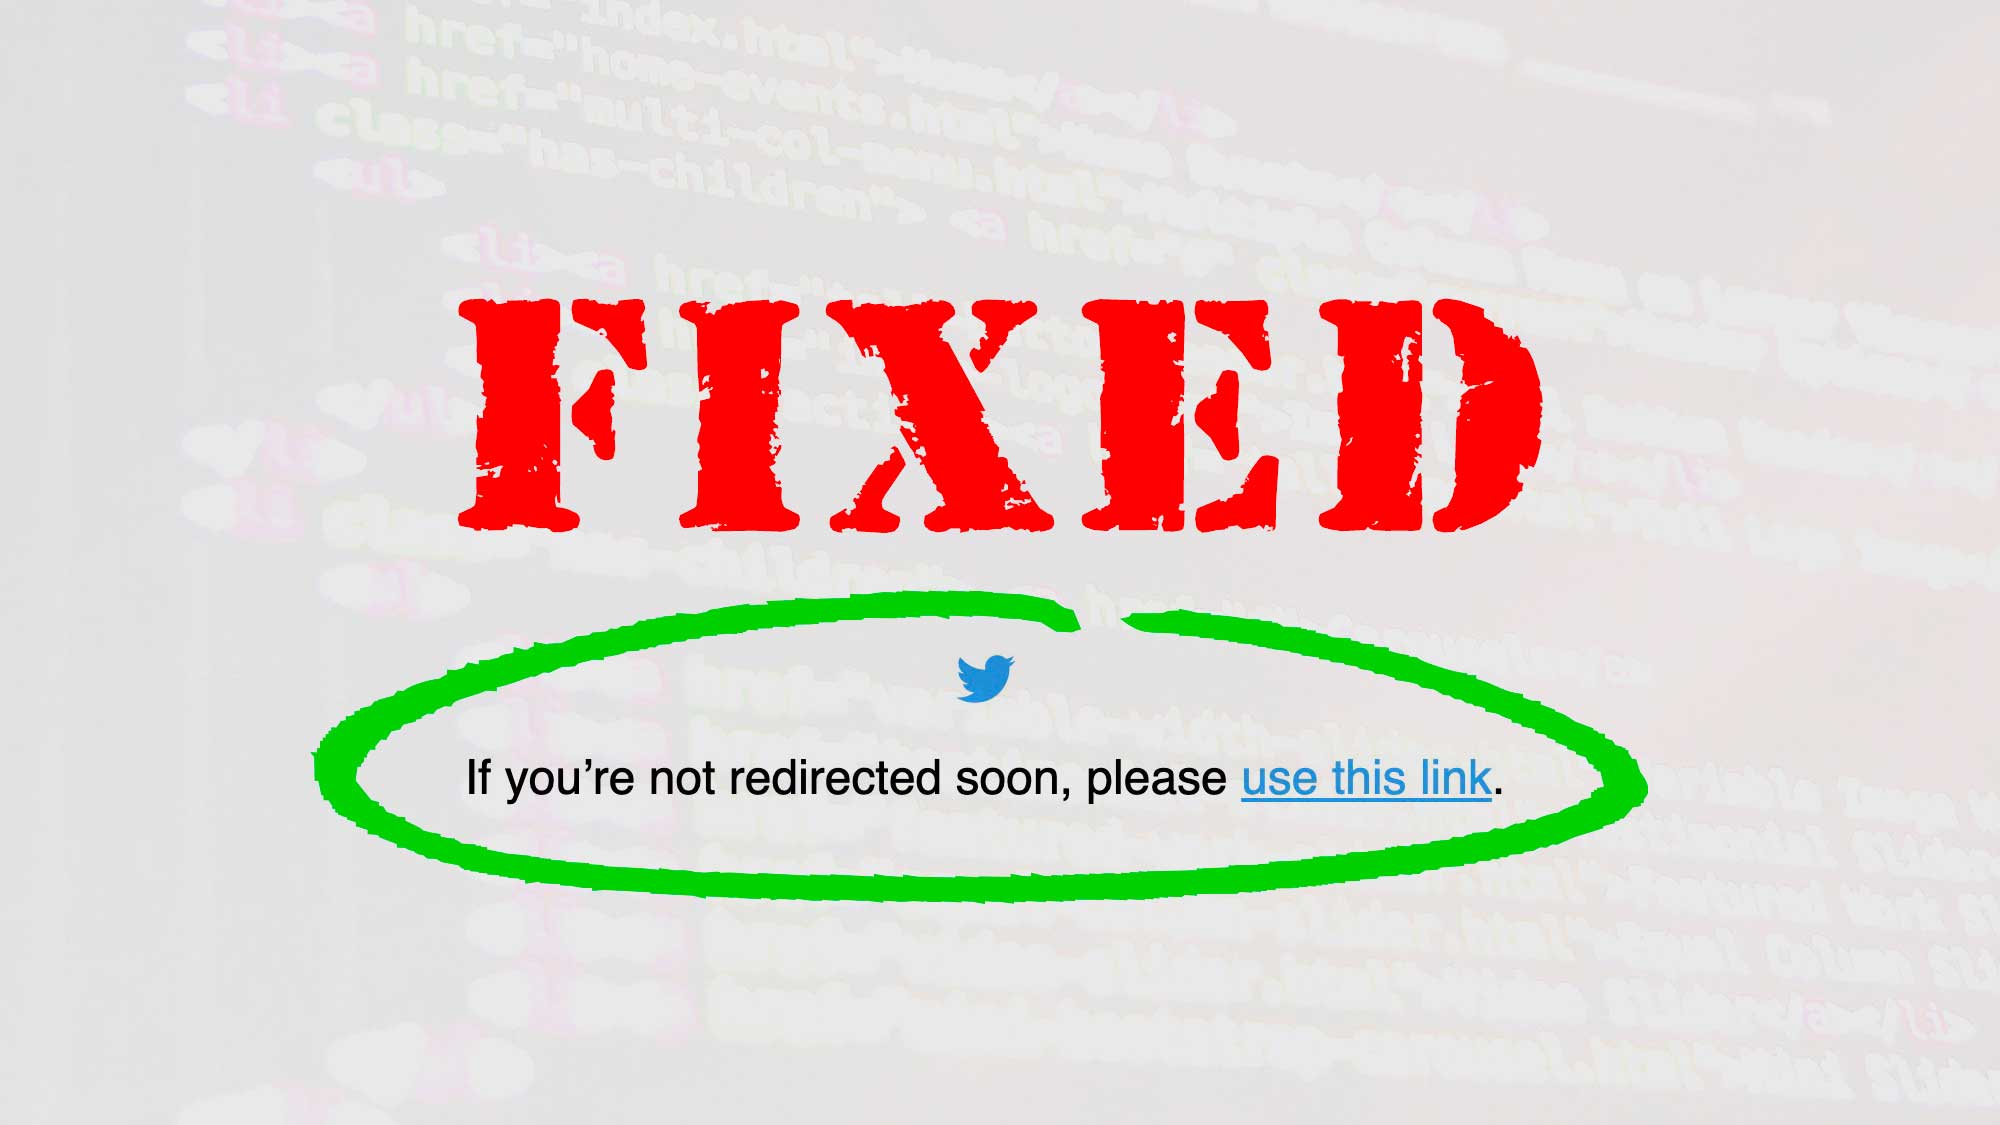 How To Fix The Twitter Error: "If You're Not Redirected Soon Please Use This Link"